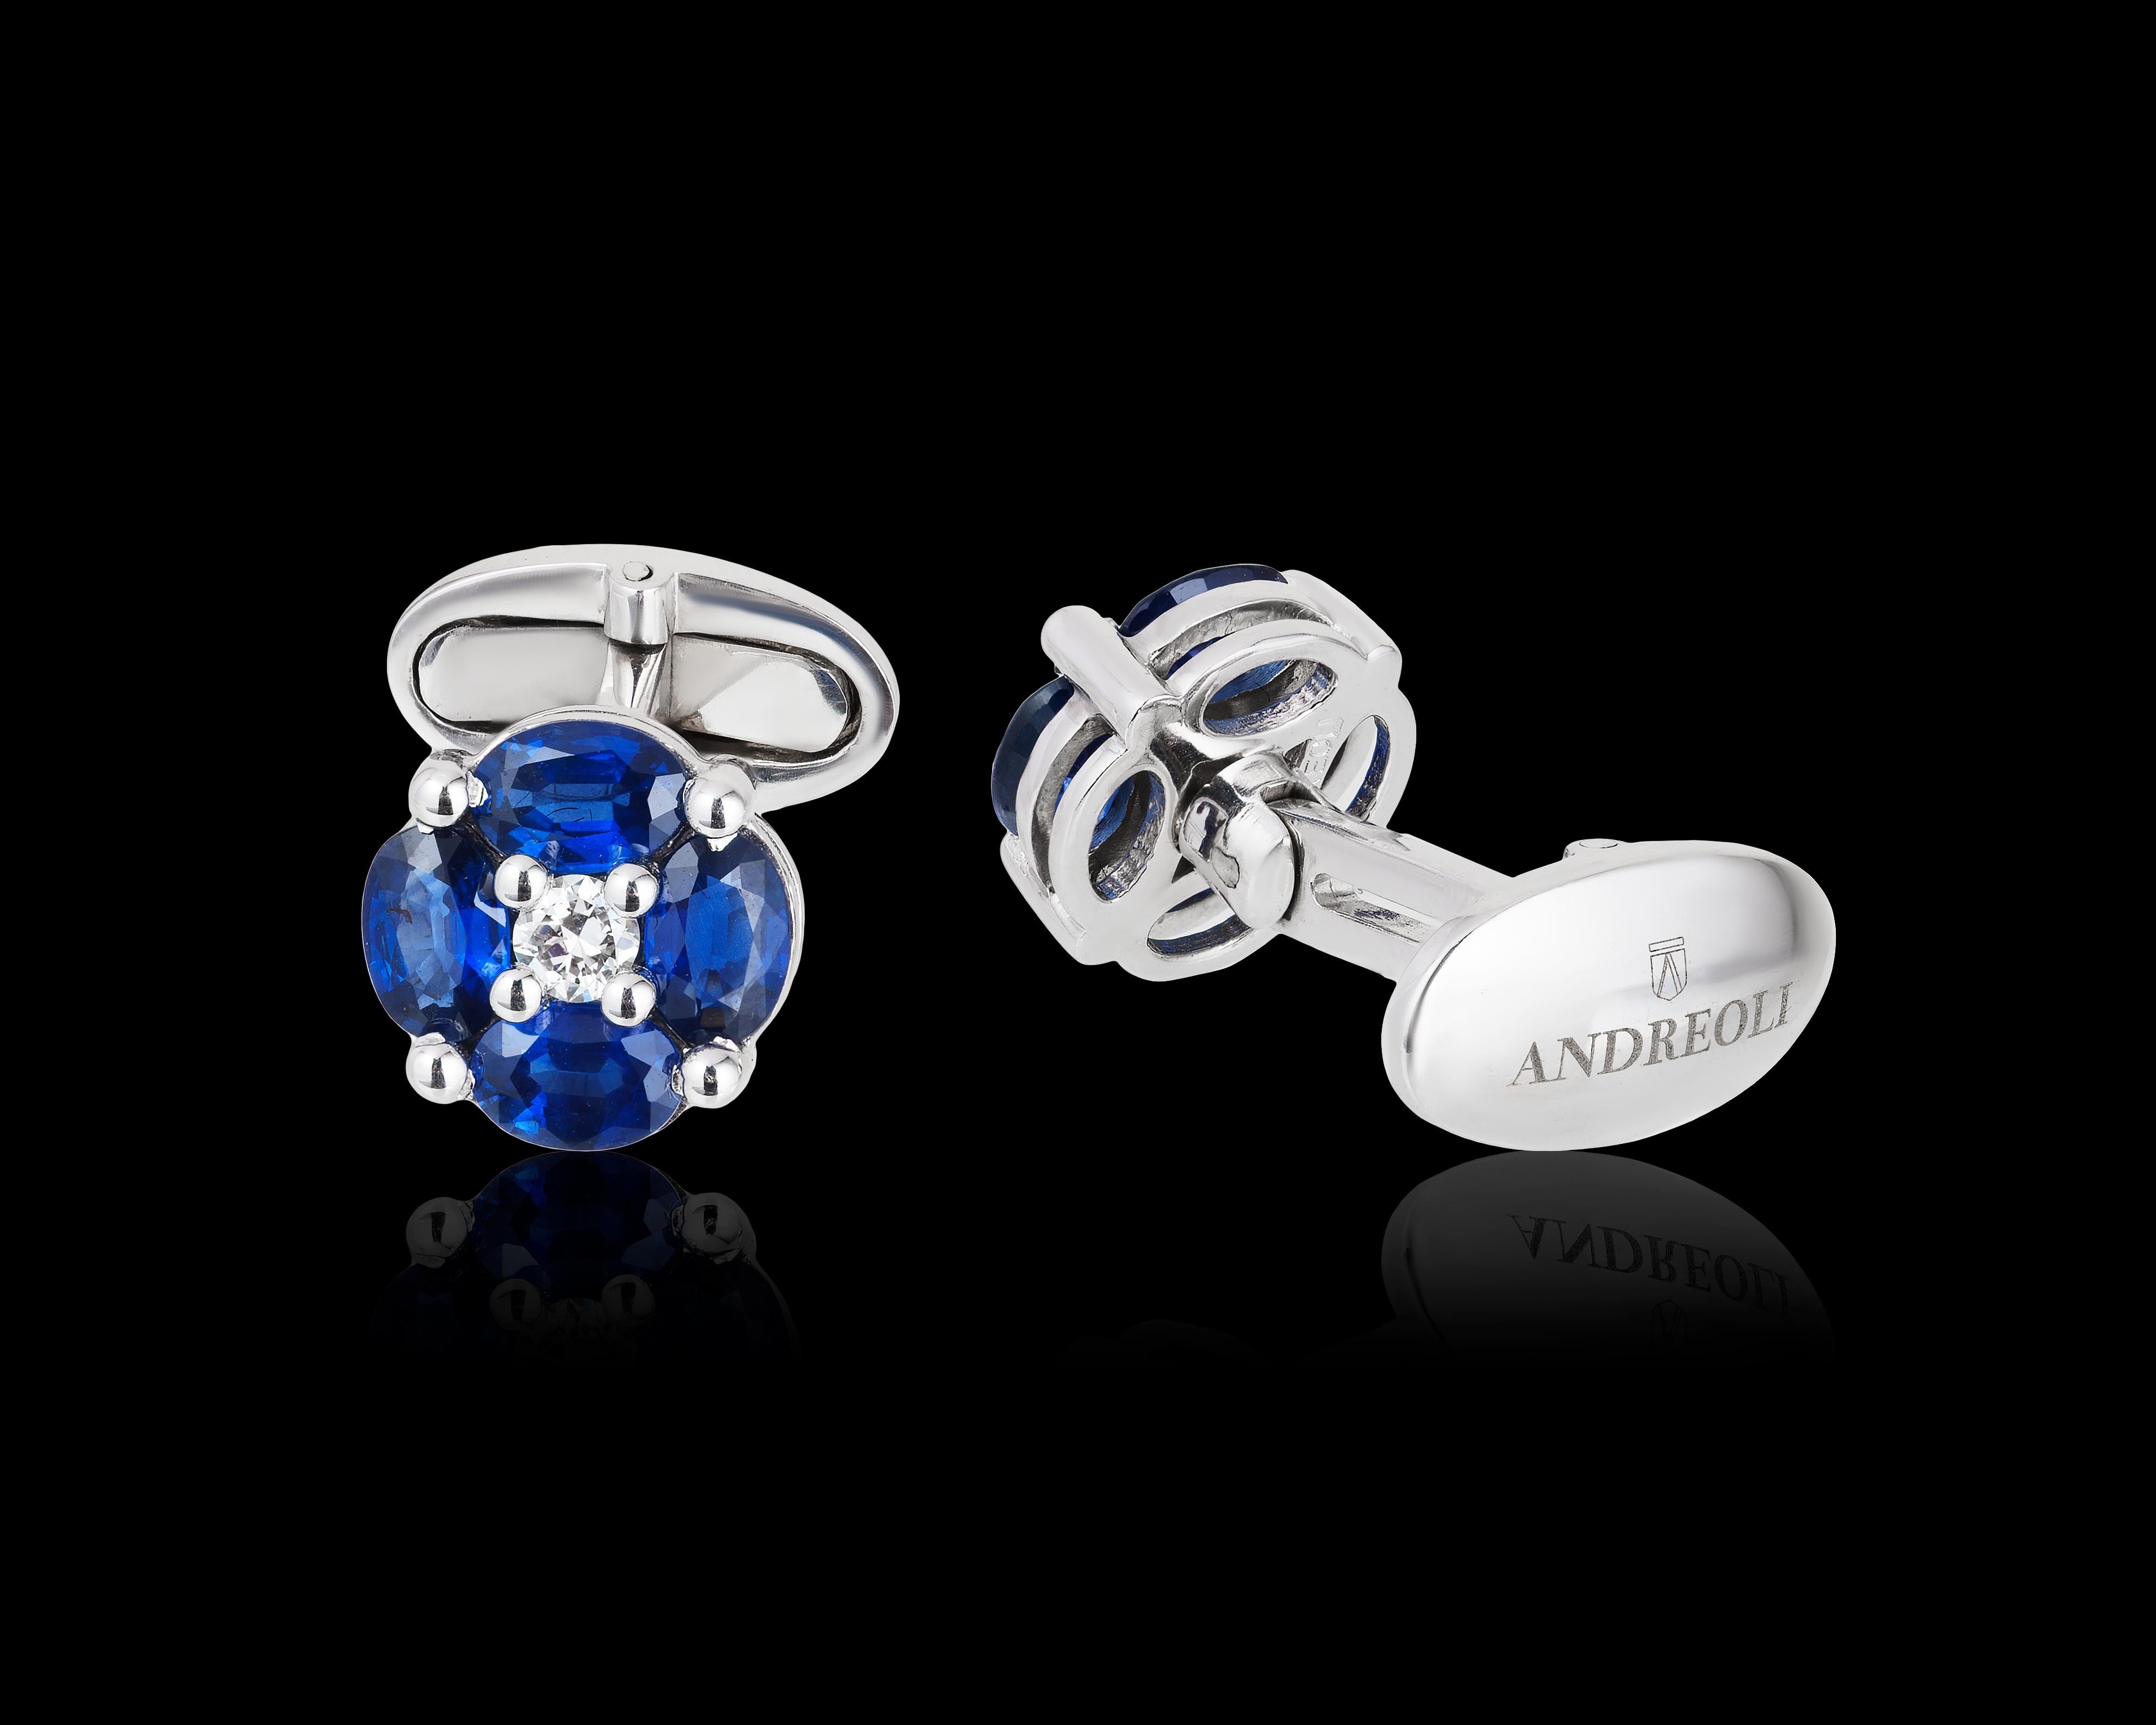 Contemporary Andreoli 4.45 Carat Blue Sapphire 18 Karat White Gold Cufflinks For Sale